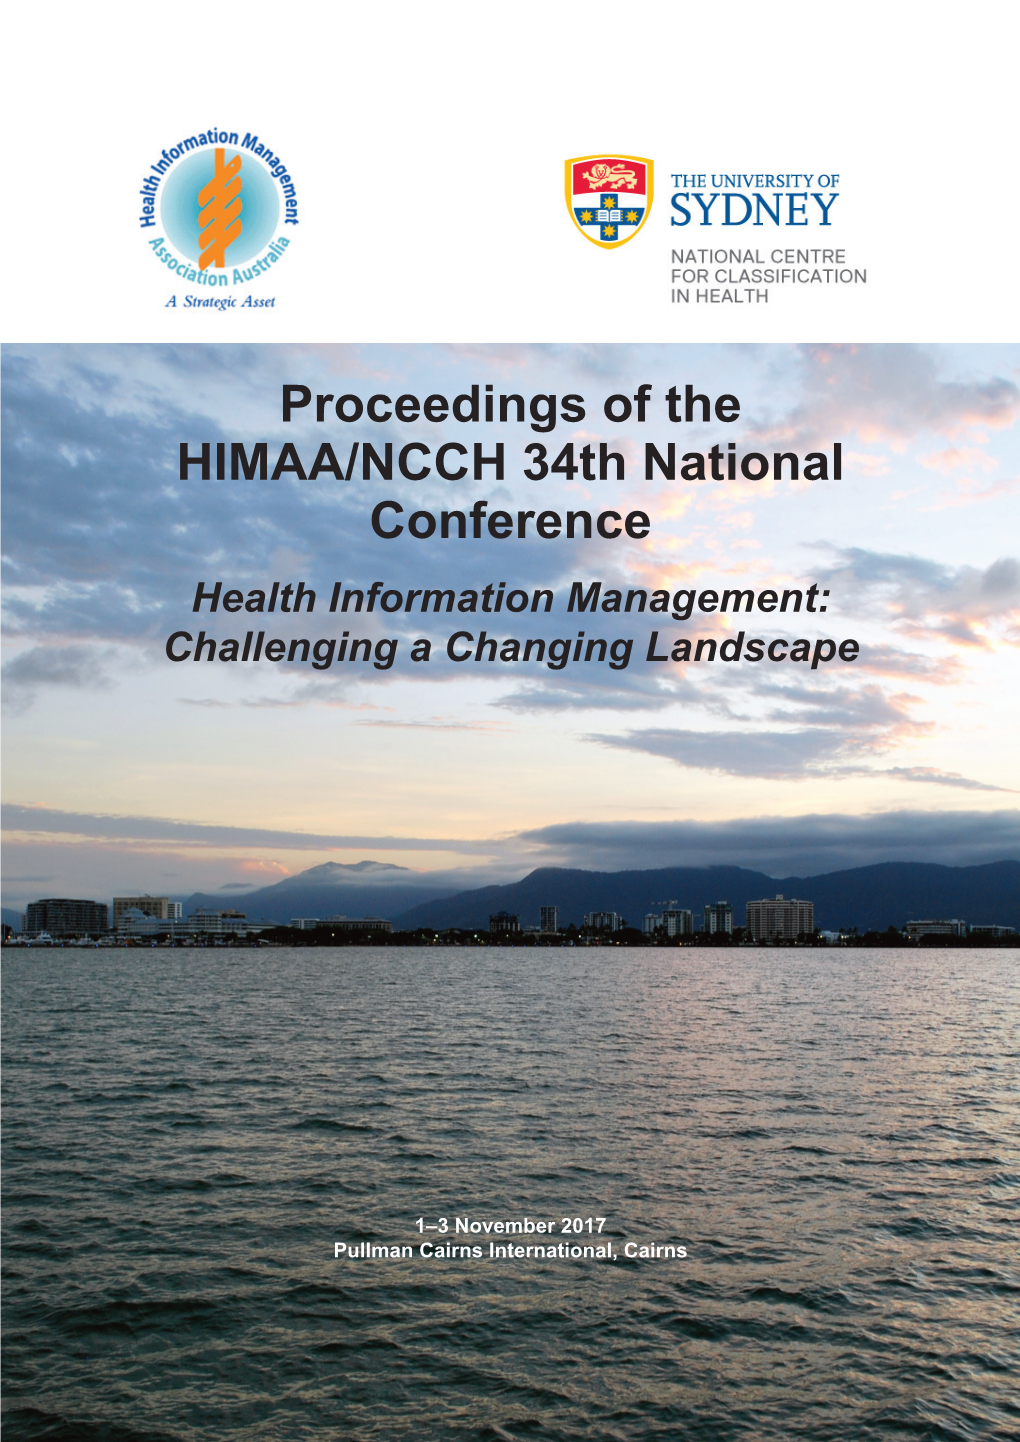 Proceedings of the HIMAA/NCCH 34Th National Conference Health Information Management: Challenging a Changing Landscape